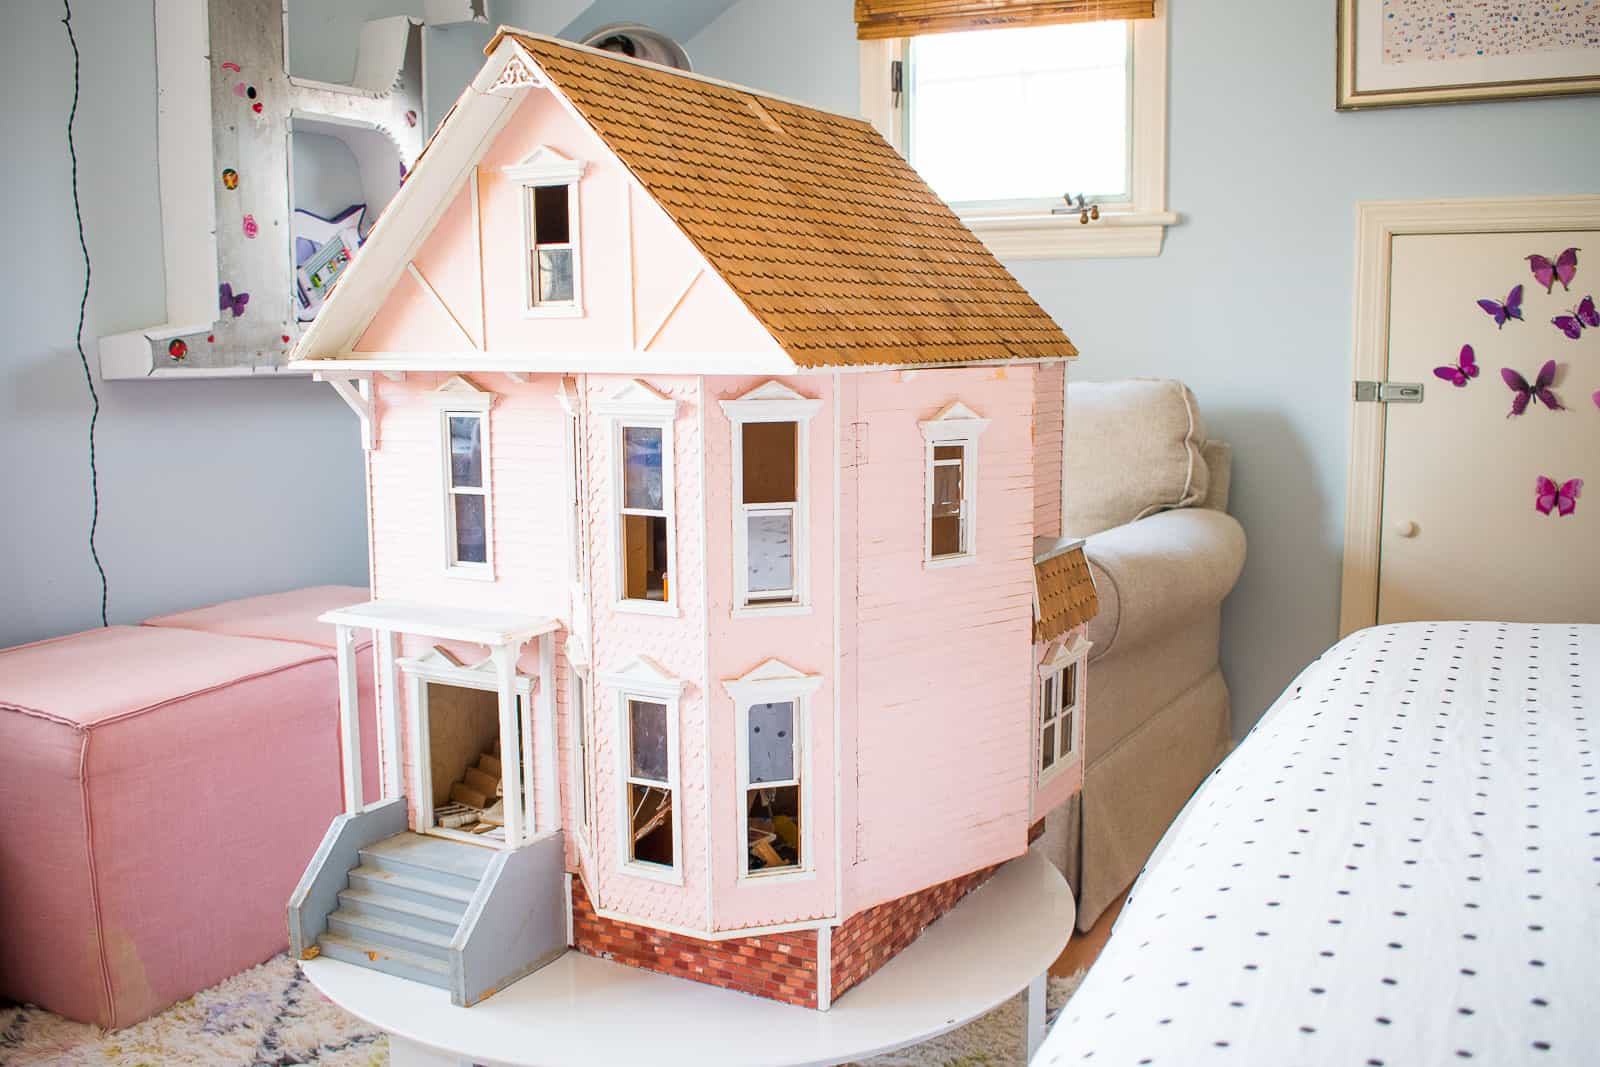 Make-Your-Own Color In Dollhouse, Dollhouse